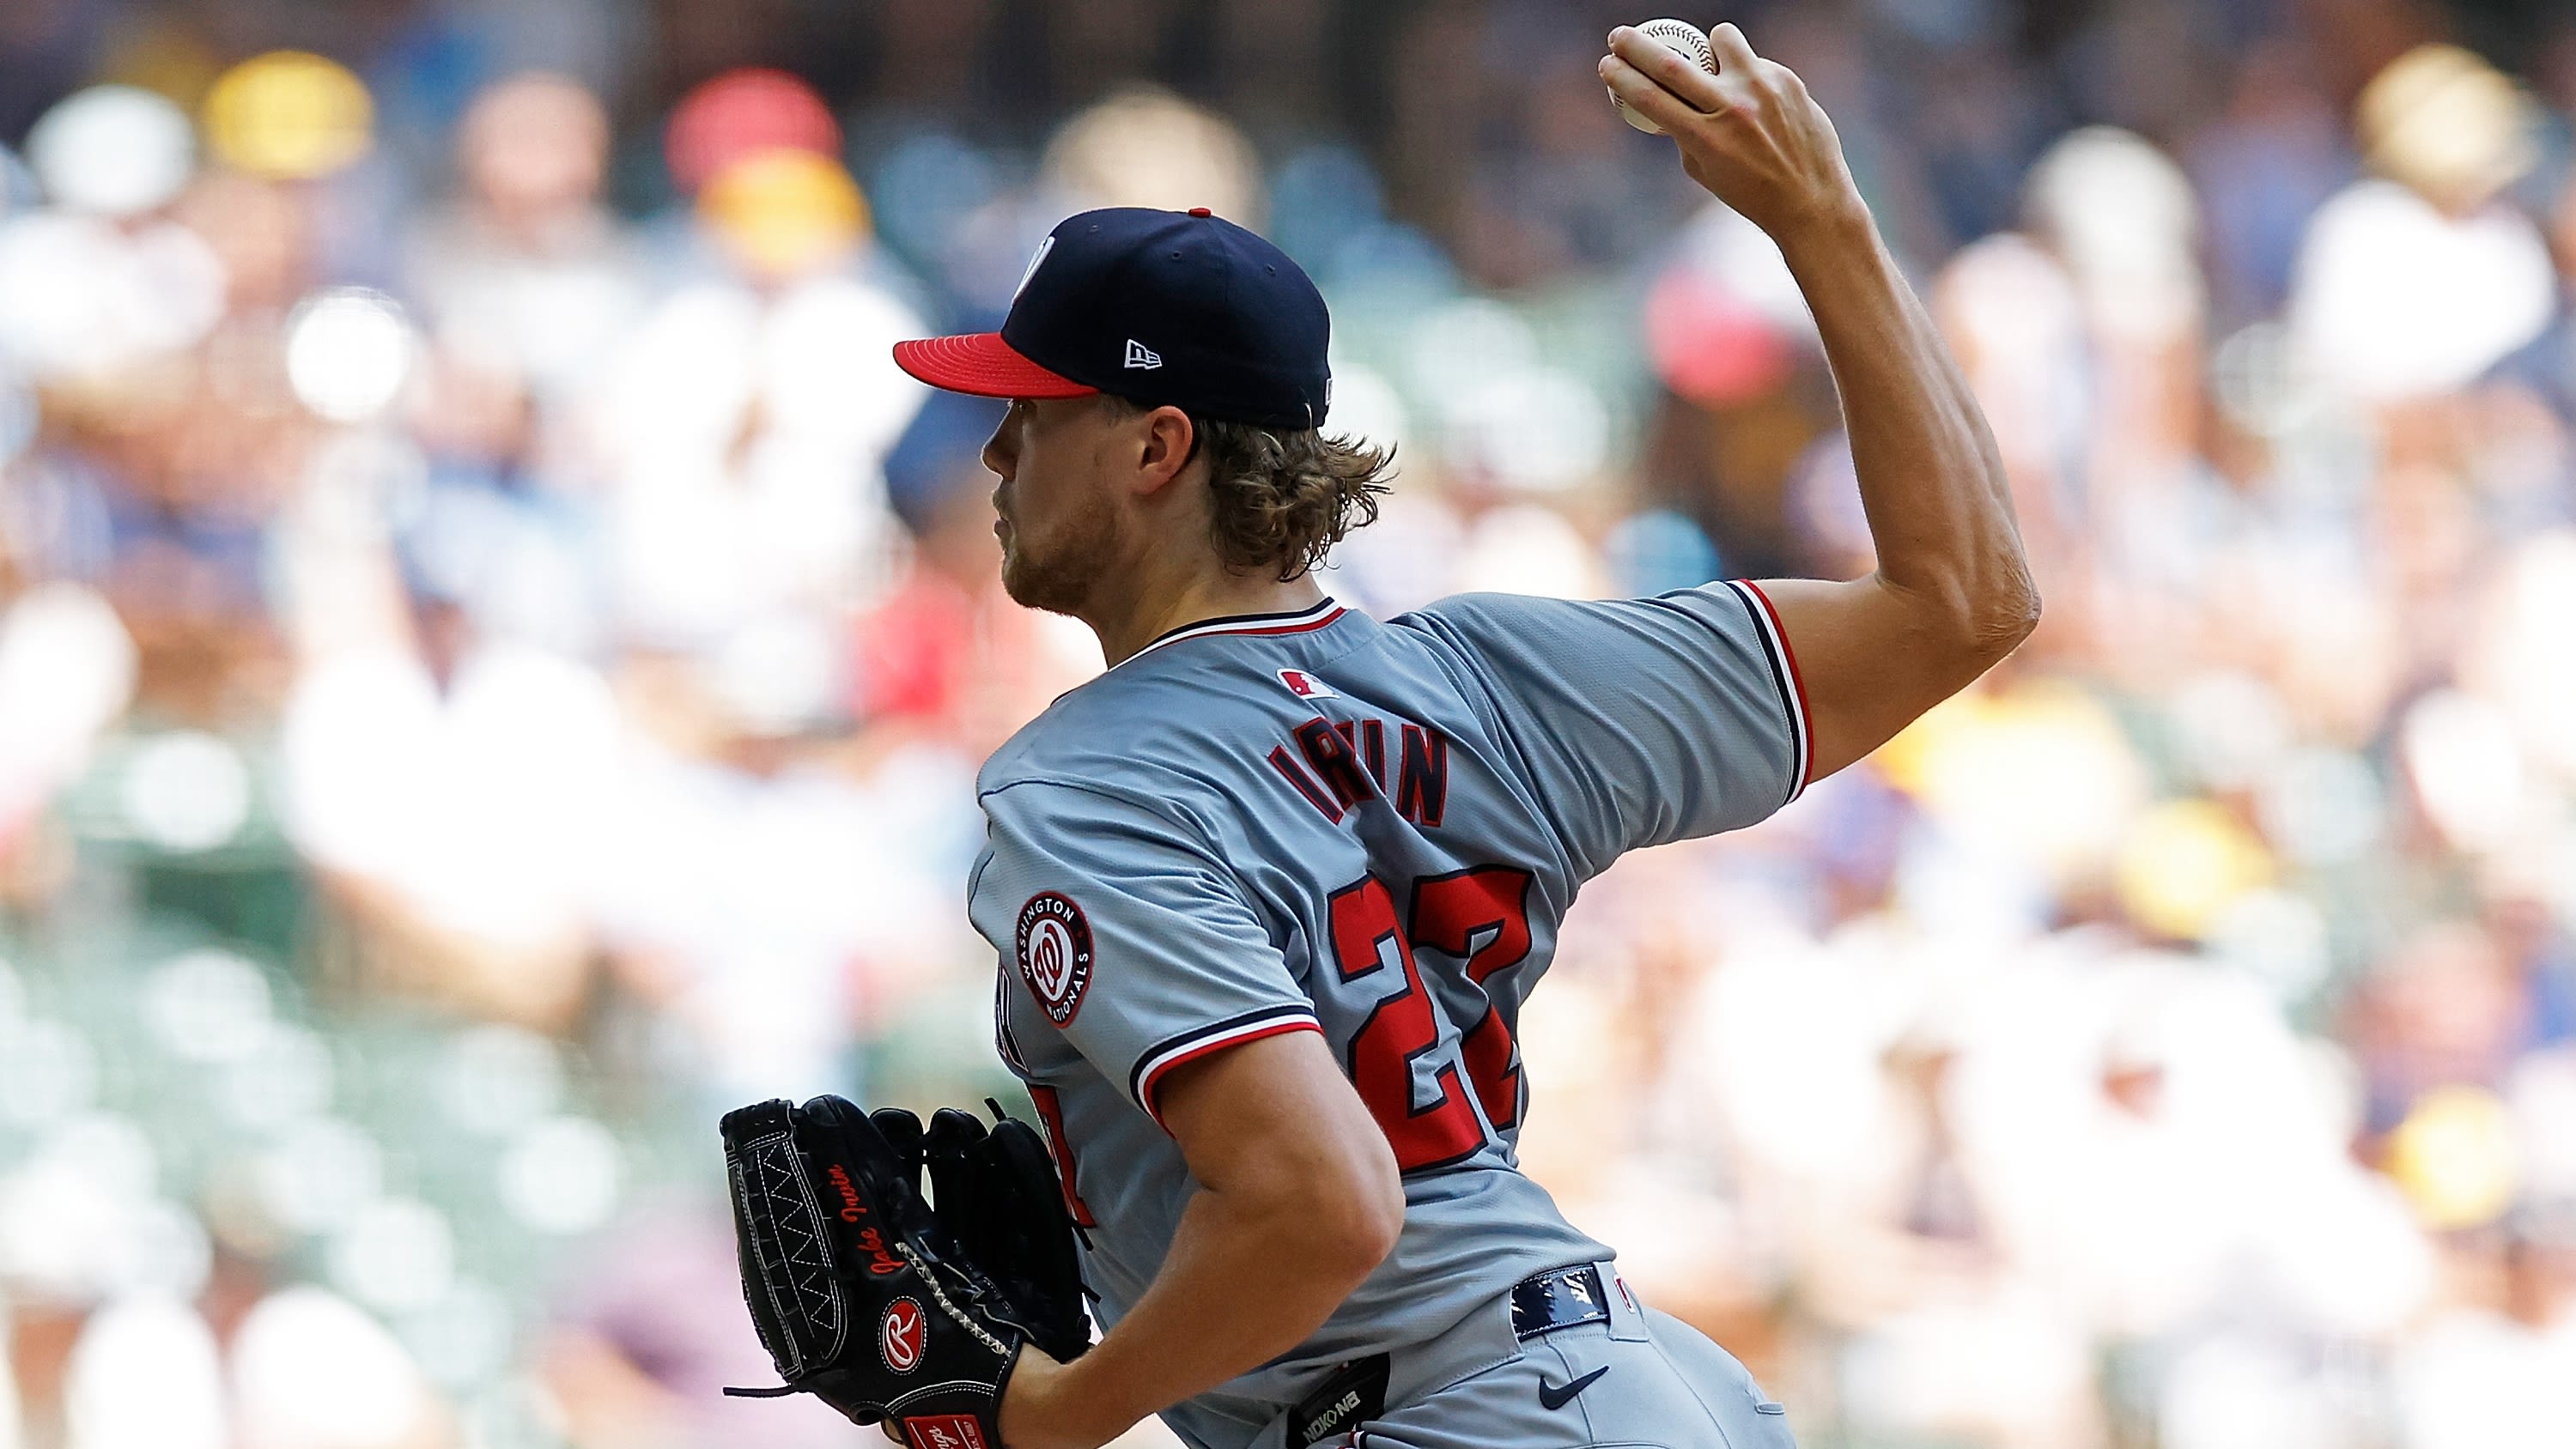 Nats catch their breath at all-star break after lopsided loss to Brewers